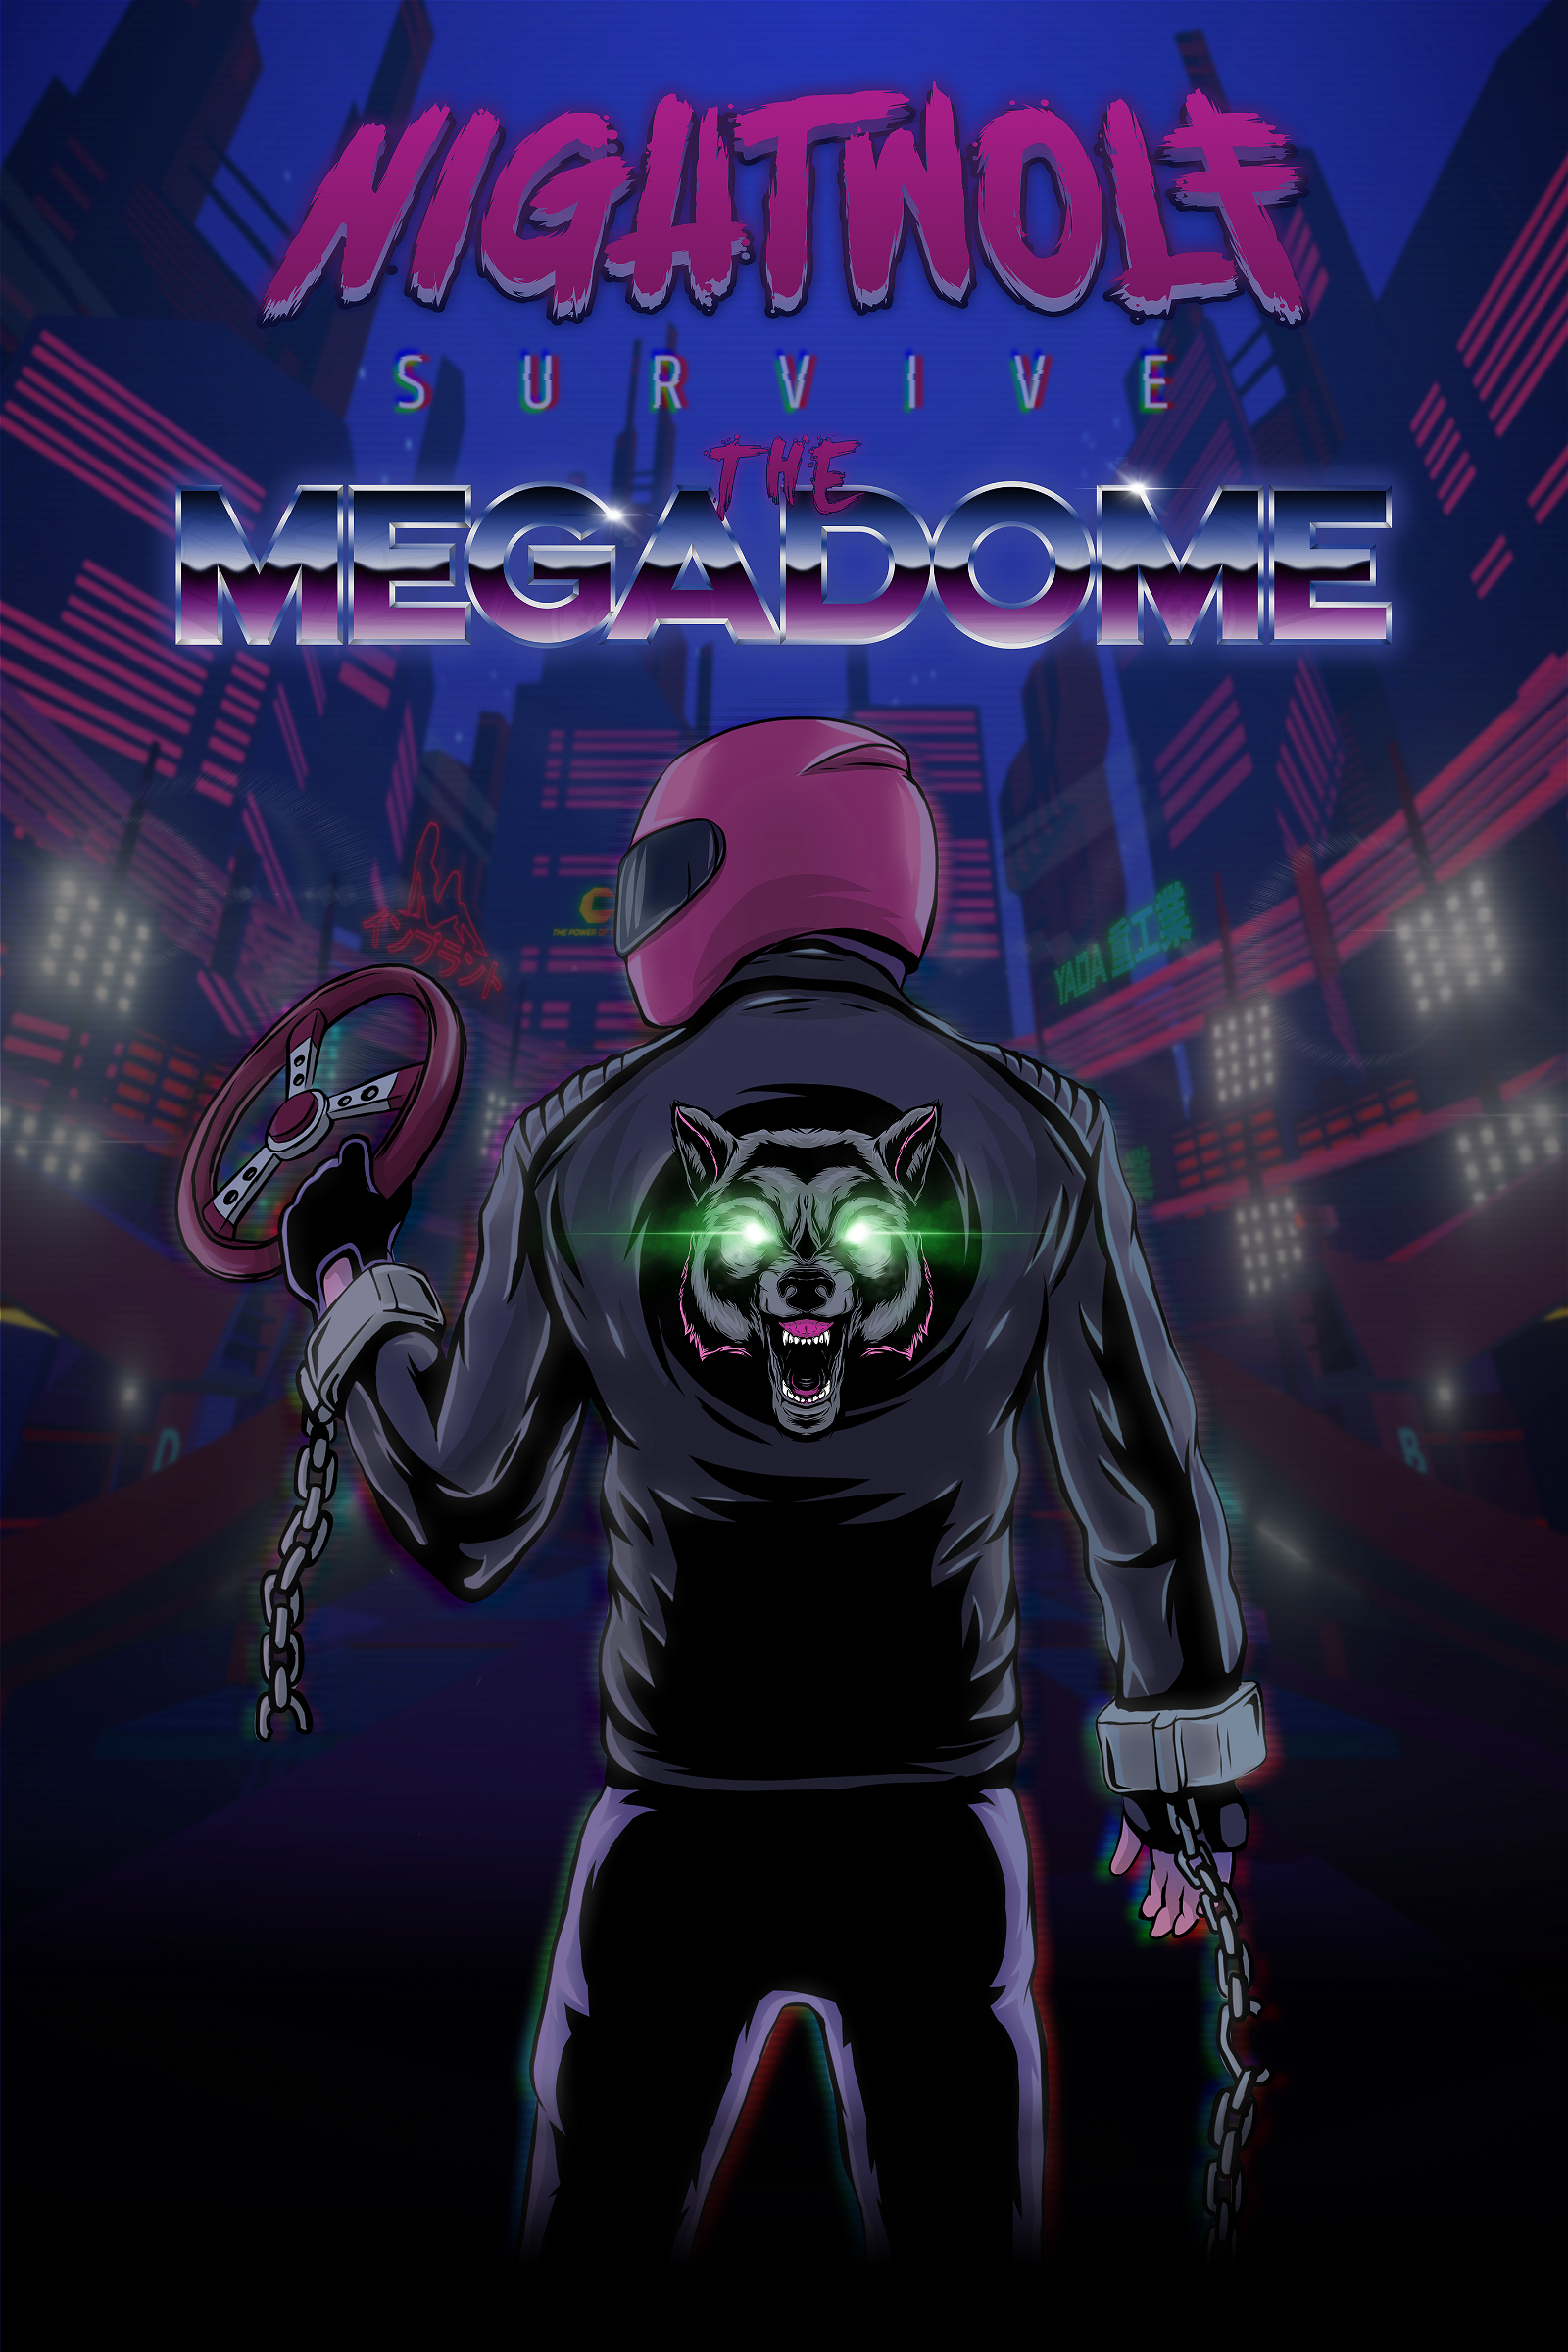 Image of Nightwolf: Survive the Megadome